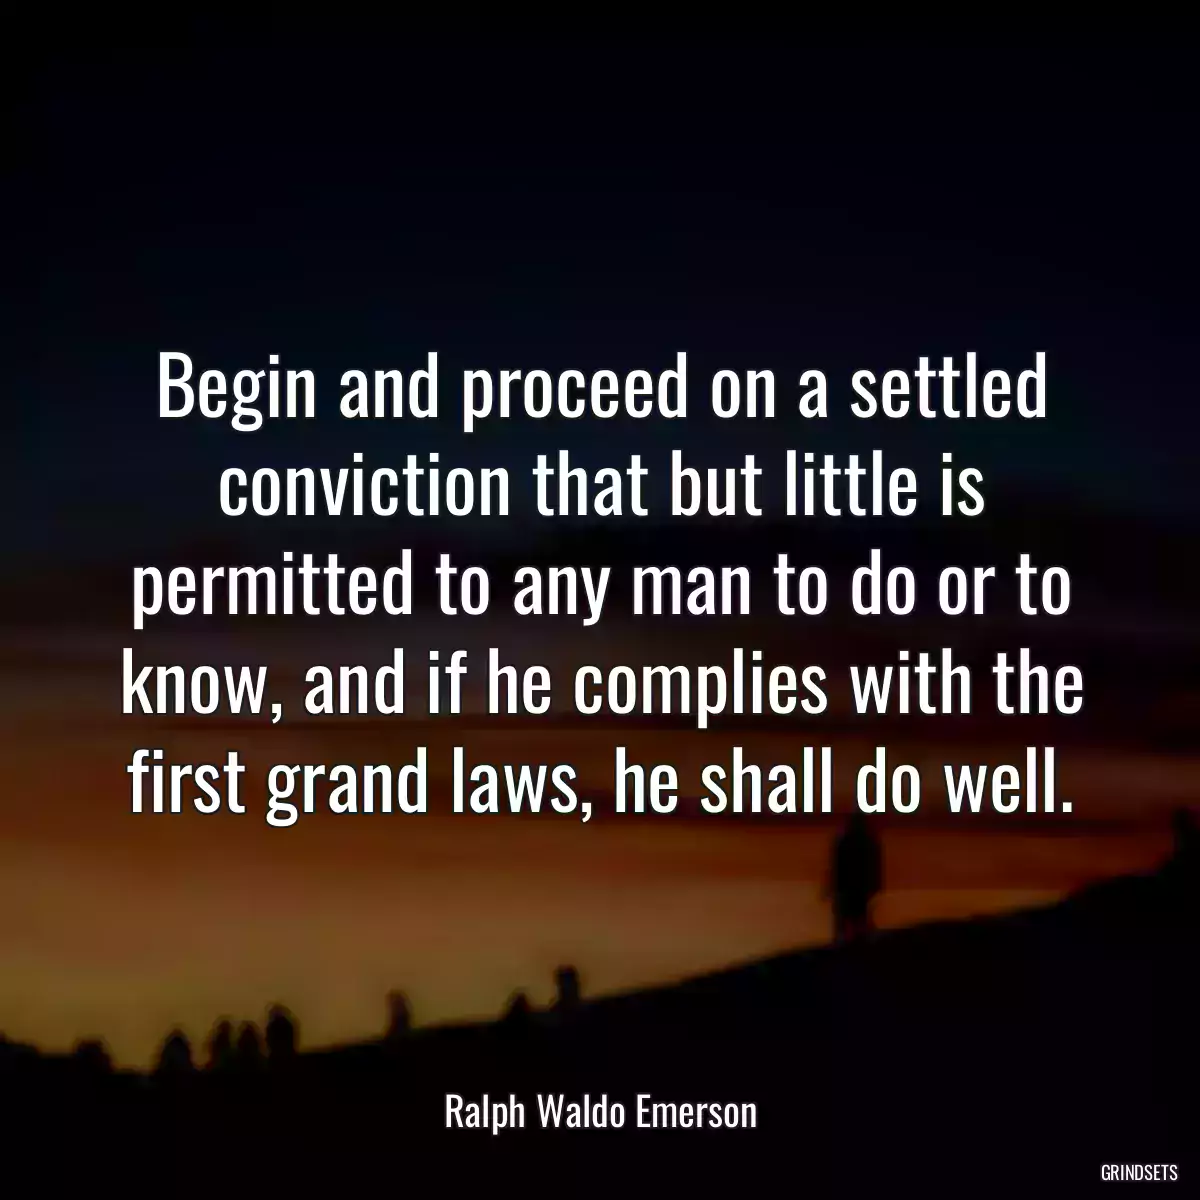 Begin and proceed on a settled conviction that but little is permitted to any man to do or to know, and if he complies with the first grand laws, he shall do well.